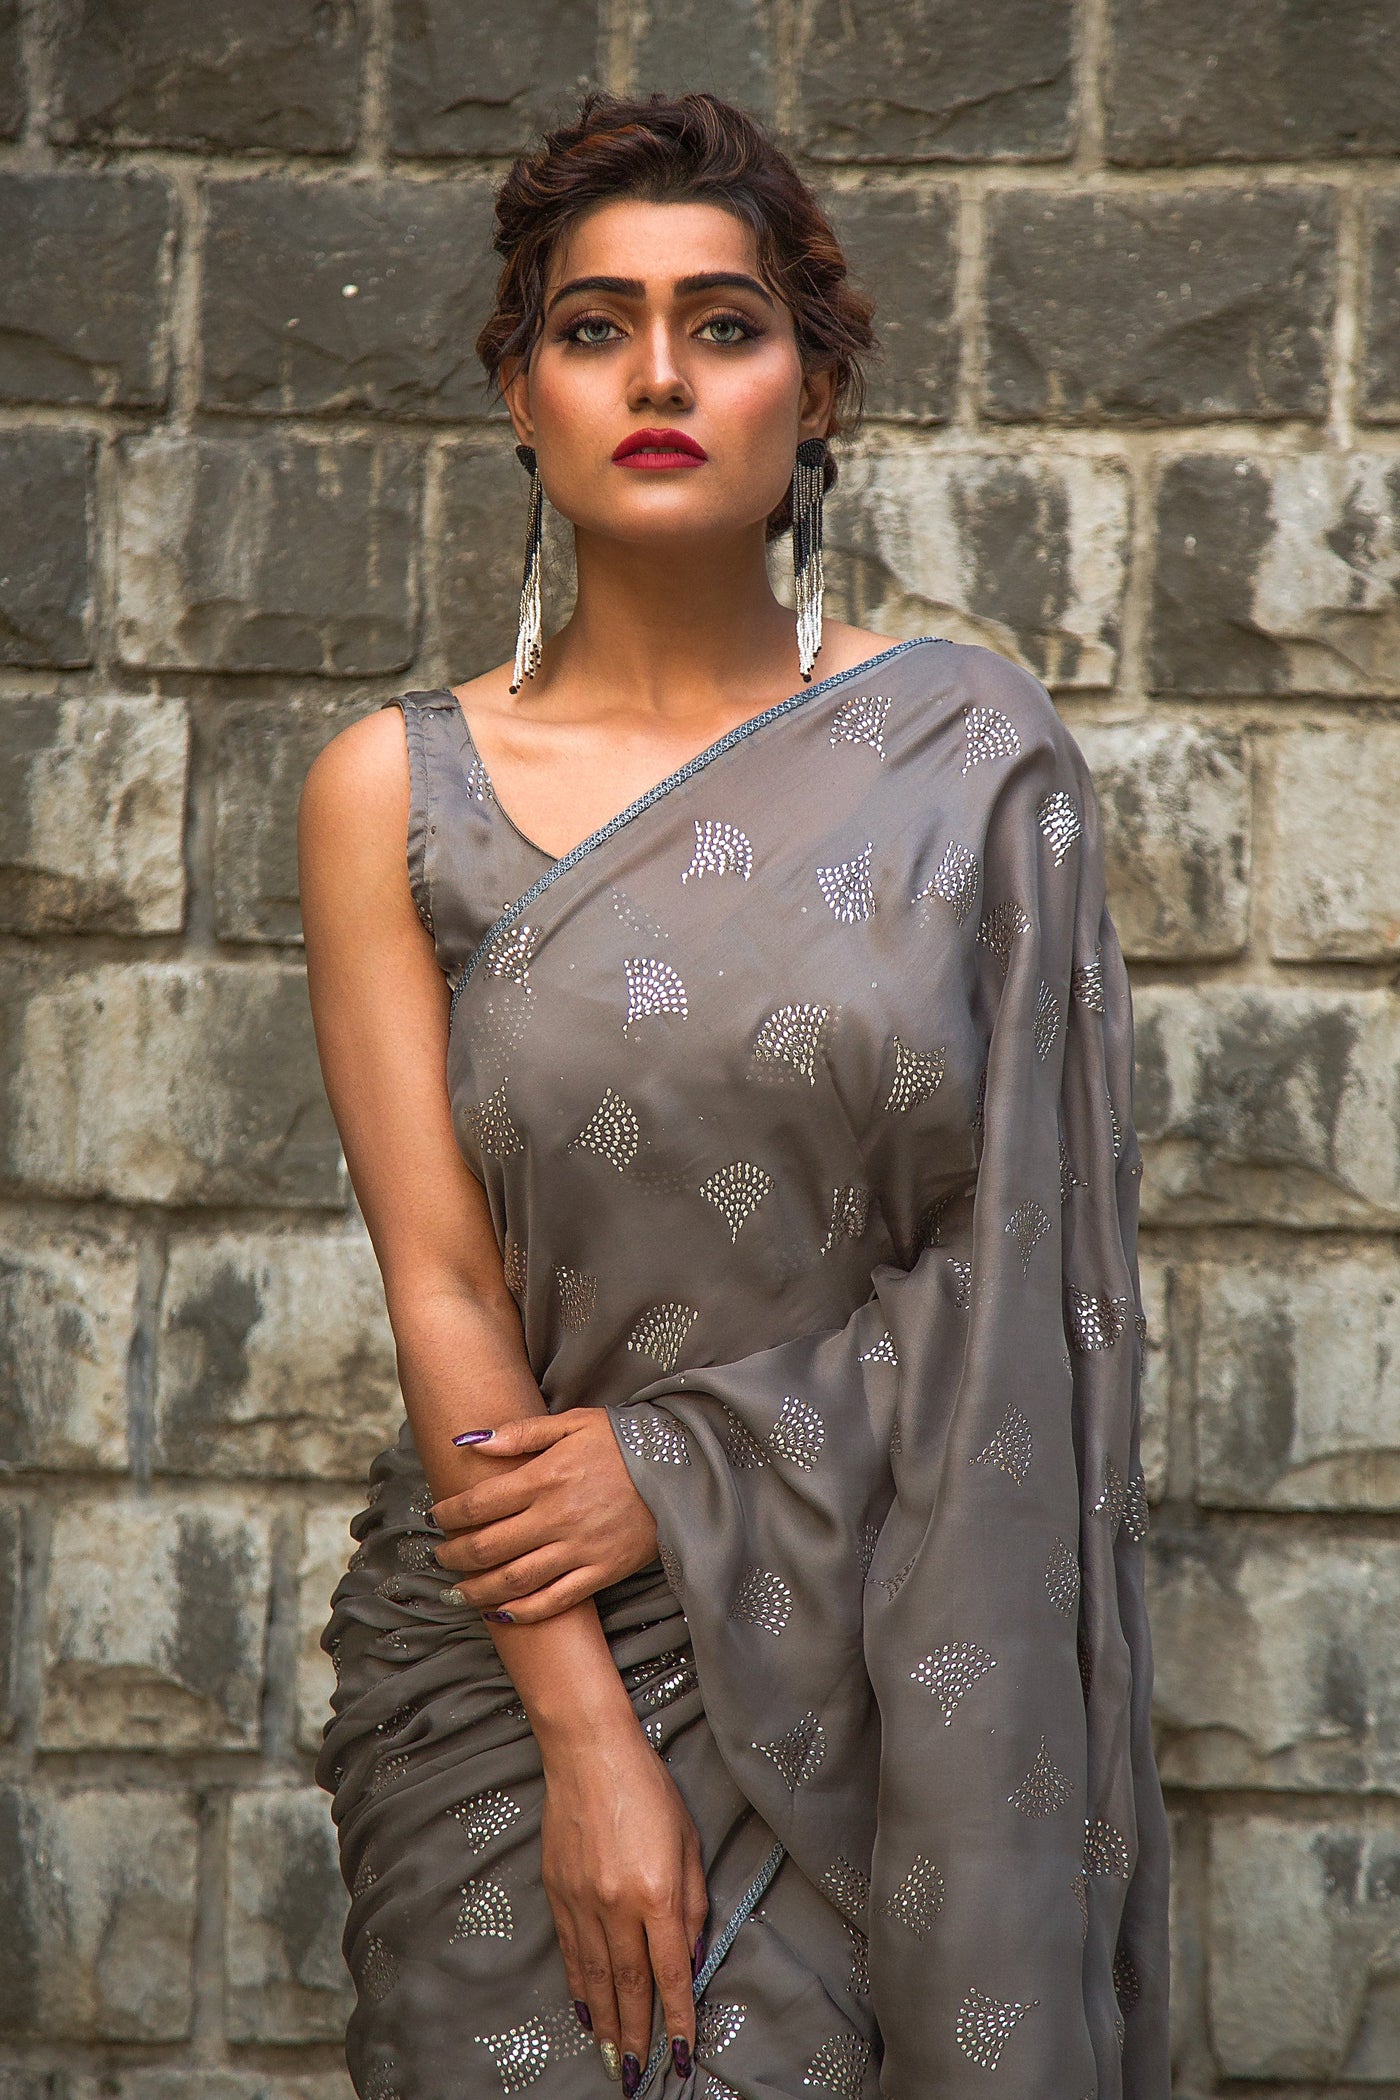 Glossed Gray Crystal Saree - Indian Clothing in Denver, CO, Aurora, CO, Boulder, CO, Fort Collins, CO, Colorado Springs, CO, Parker, CO, Highlands Ranch, CO, Cherry Creek, CO, Centennial, CO, and Longmont, CO. Nationwide shipping USA - India Fashion X